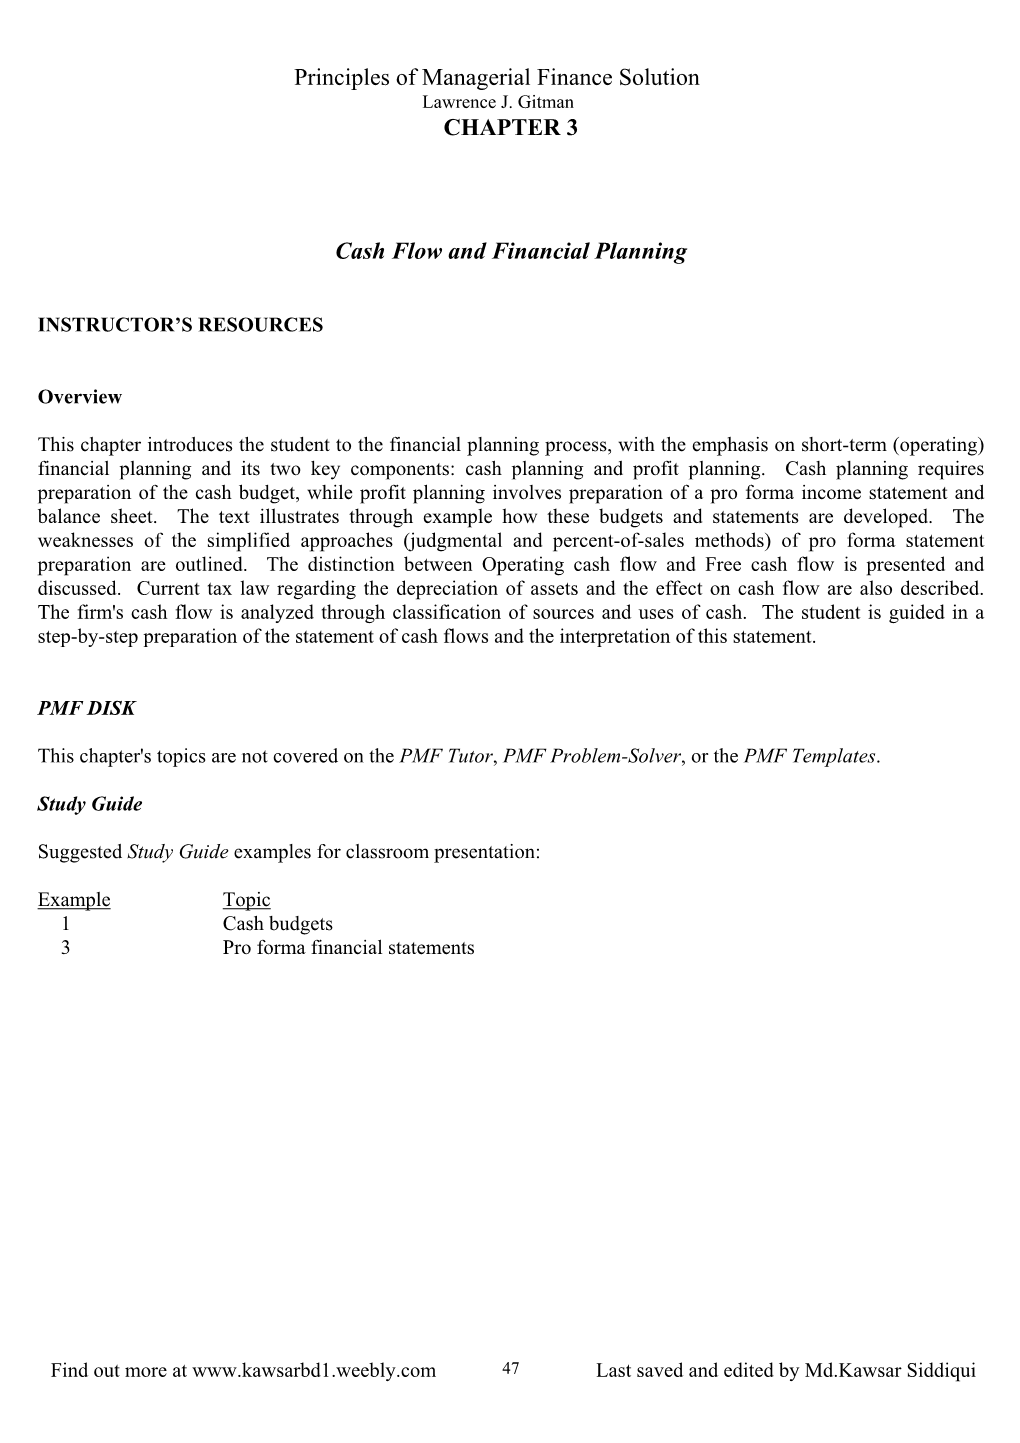 Chapter 3 Cash Flow and Financial Planning ANSWERS to REVIEW QUESTIONS